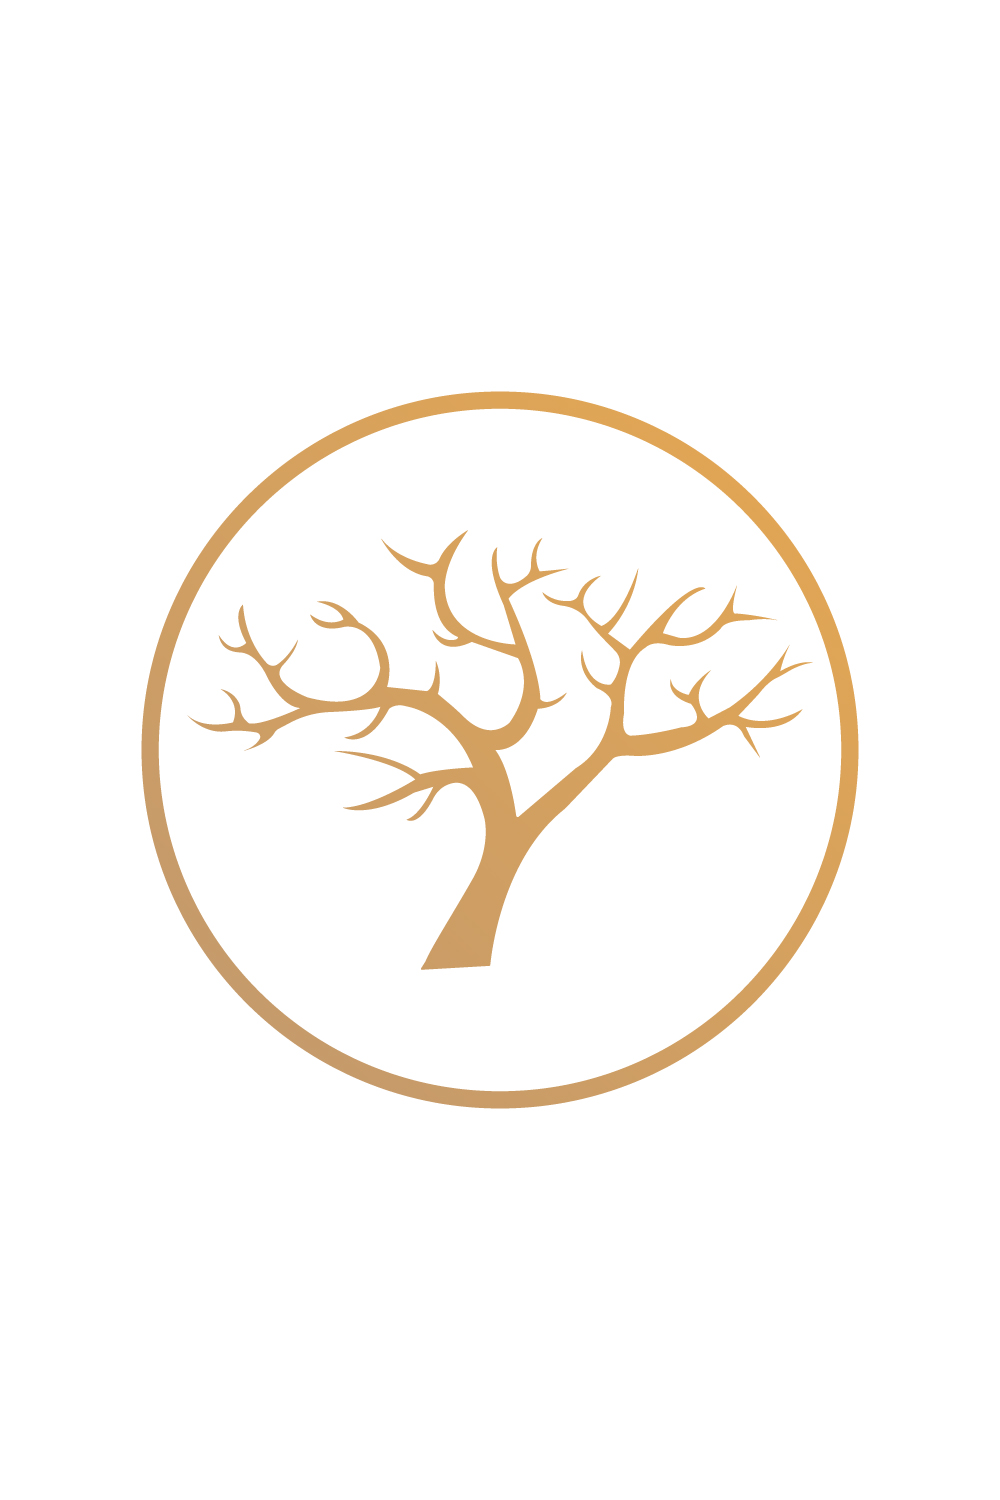 Dry tree logo design vector images Dead Trees logo design Template royalty Cracked wood tree circle images pinterest preview image.